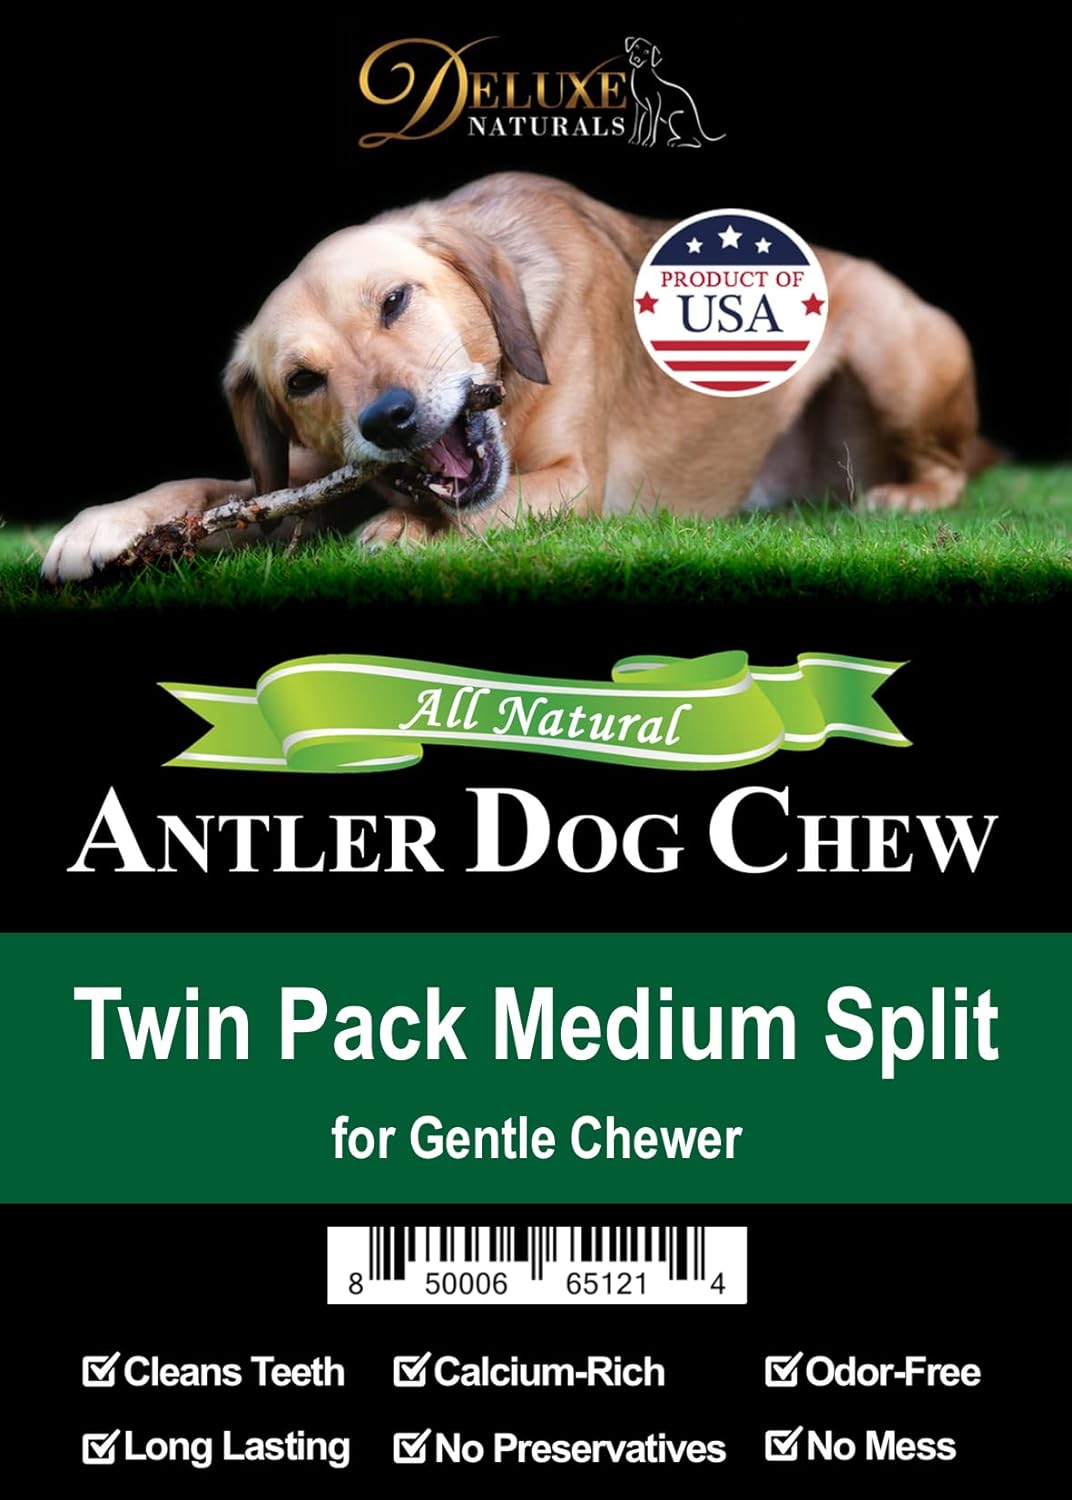 Deluxe Naturals Elk Antler Chews for Dogs | Naturally Shed USA Collected Elk Antlers | All Natural A-Grade Premium Elk Antler Dog Chews | Product of USA, Twin Pack Medium Split : Pet Supplies